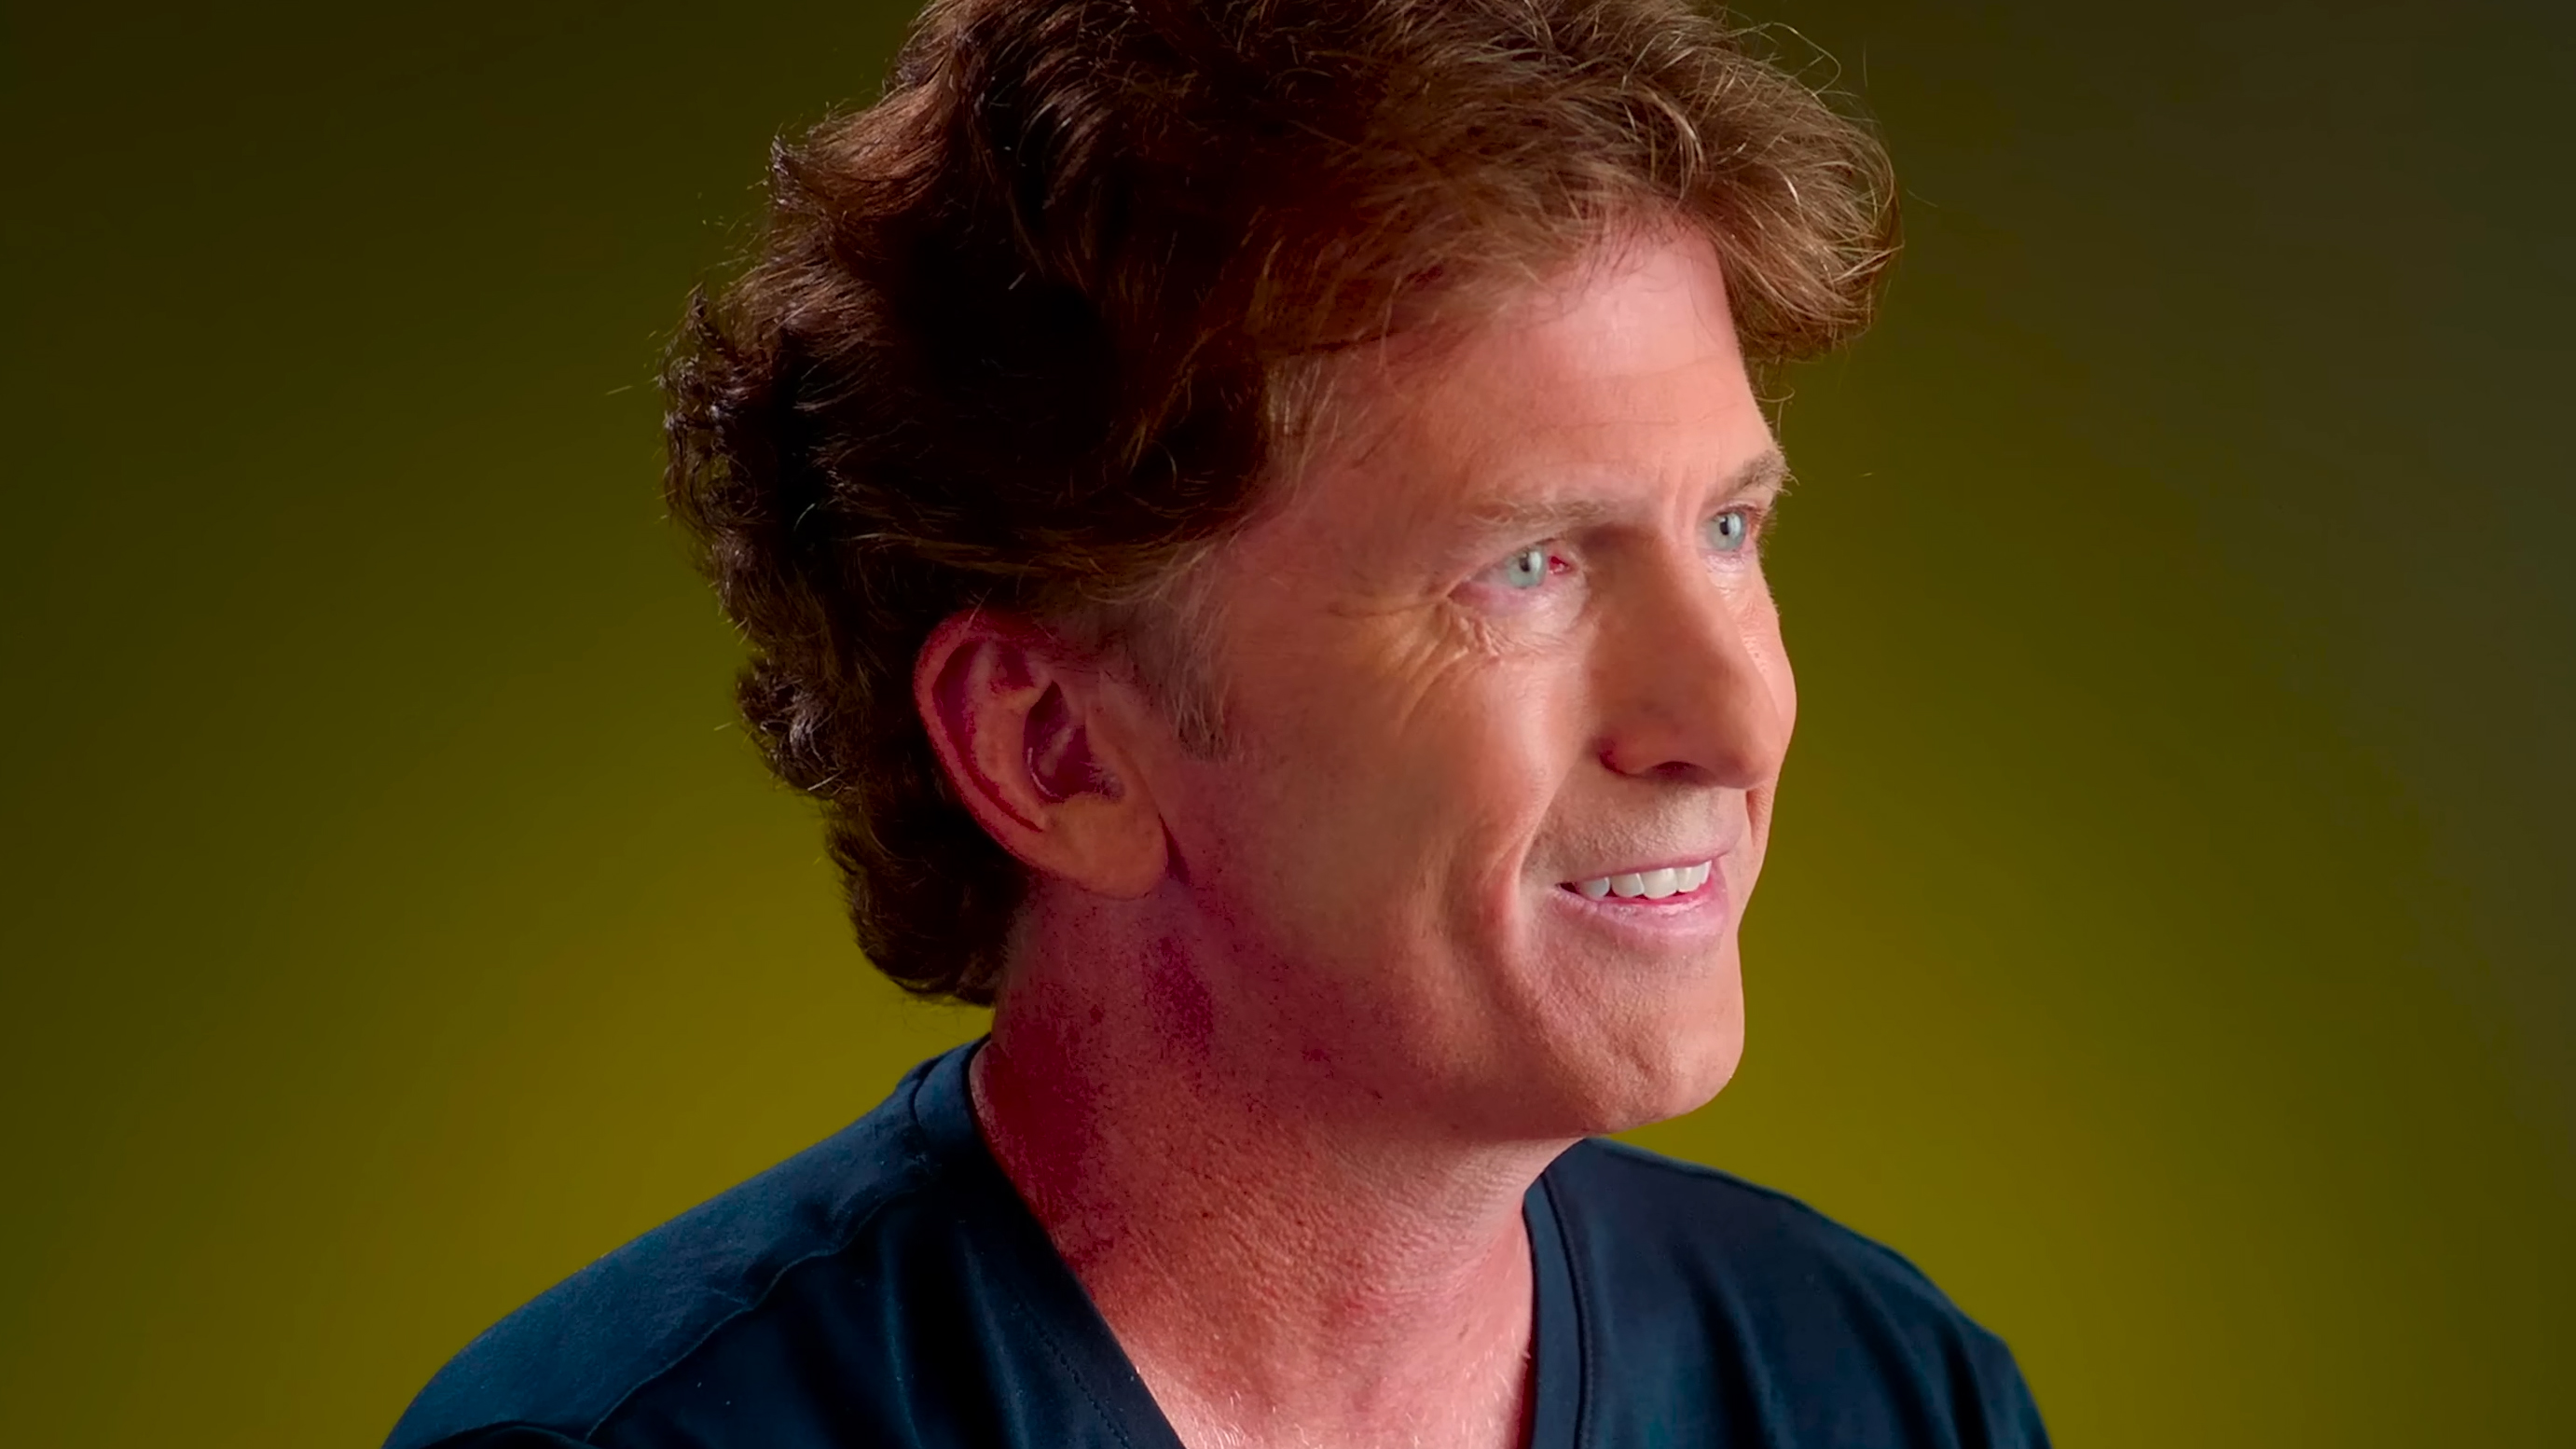  'Fallout's yours'—Todd Howard learned he could make Fallout 3 from a Post-It 